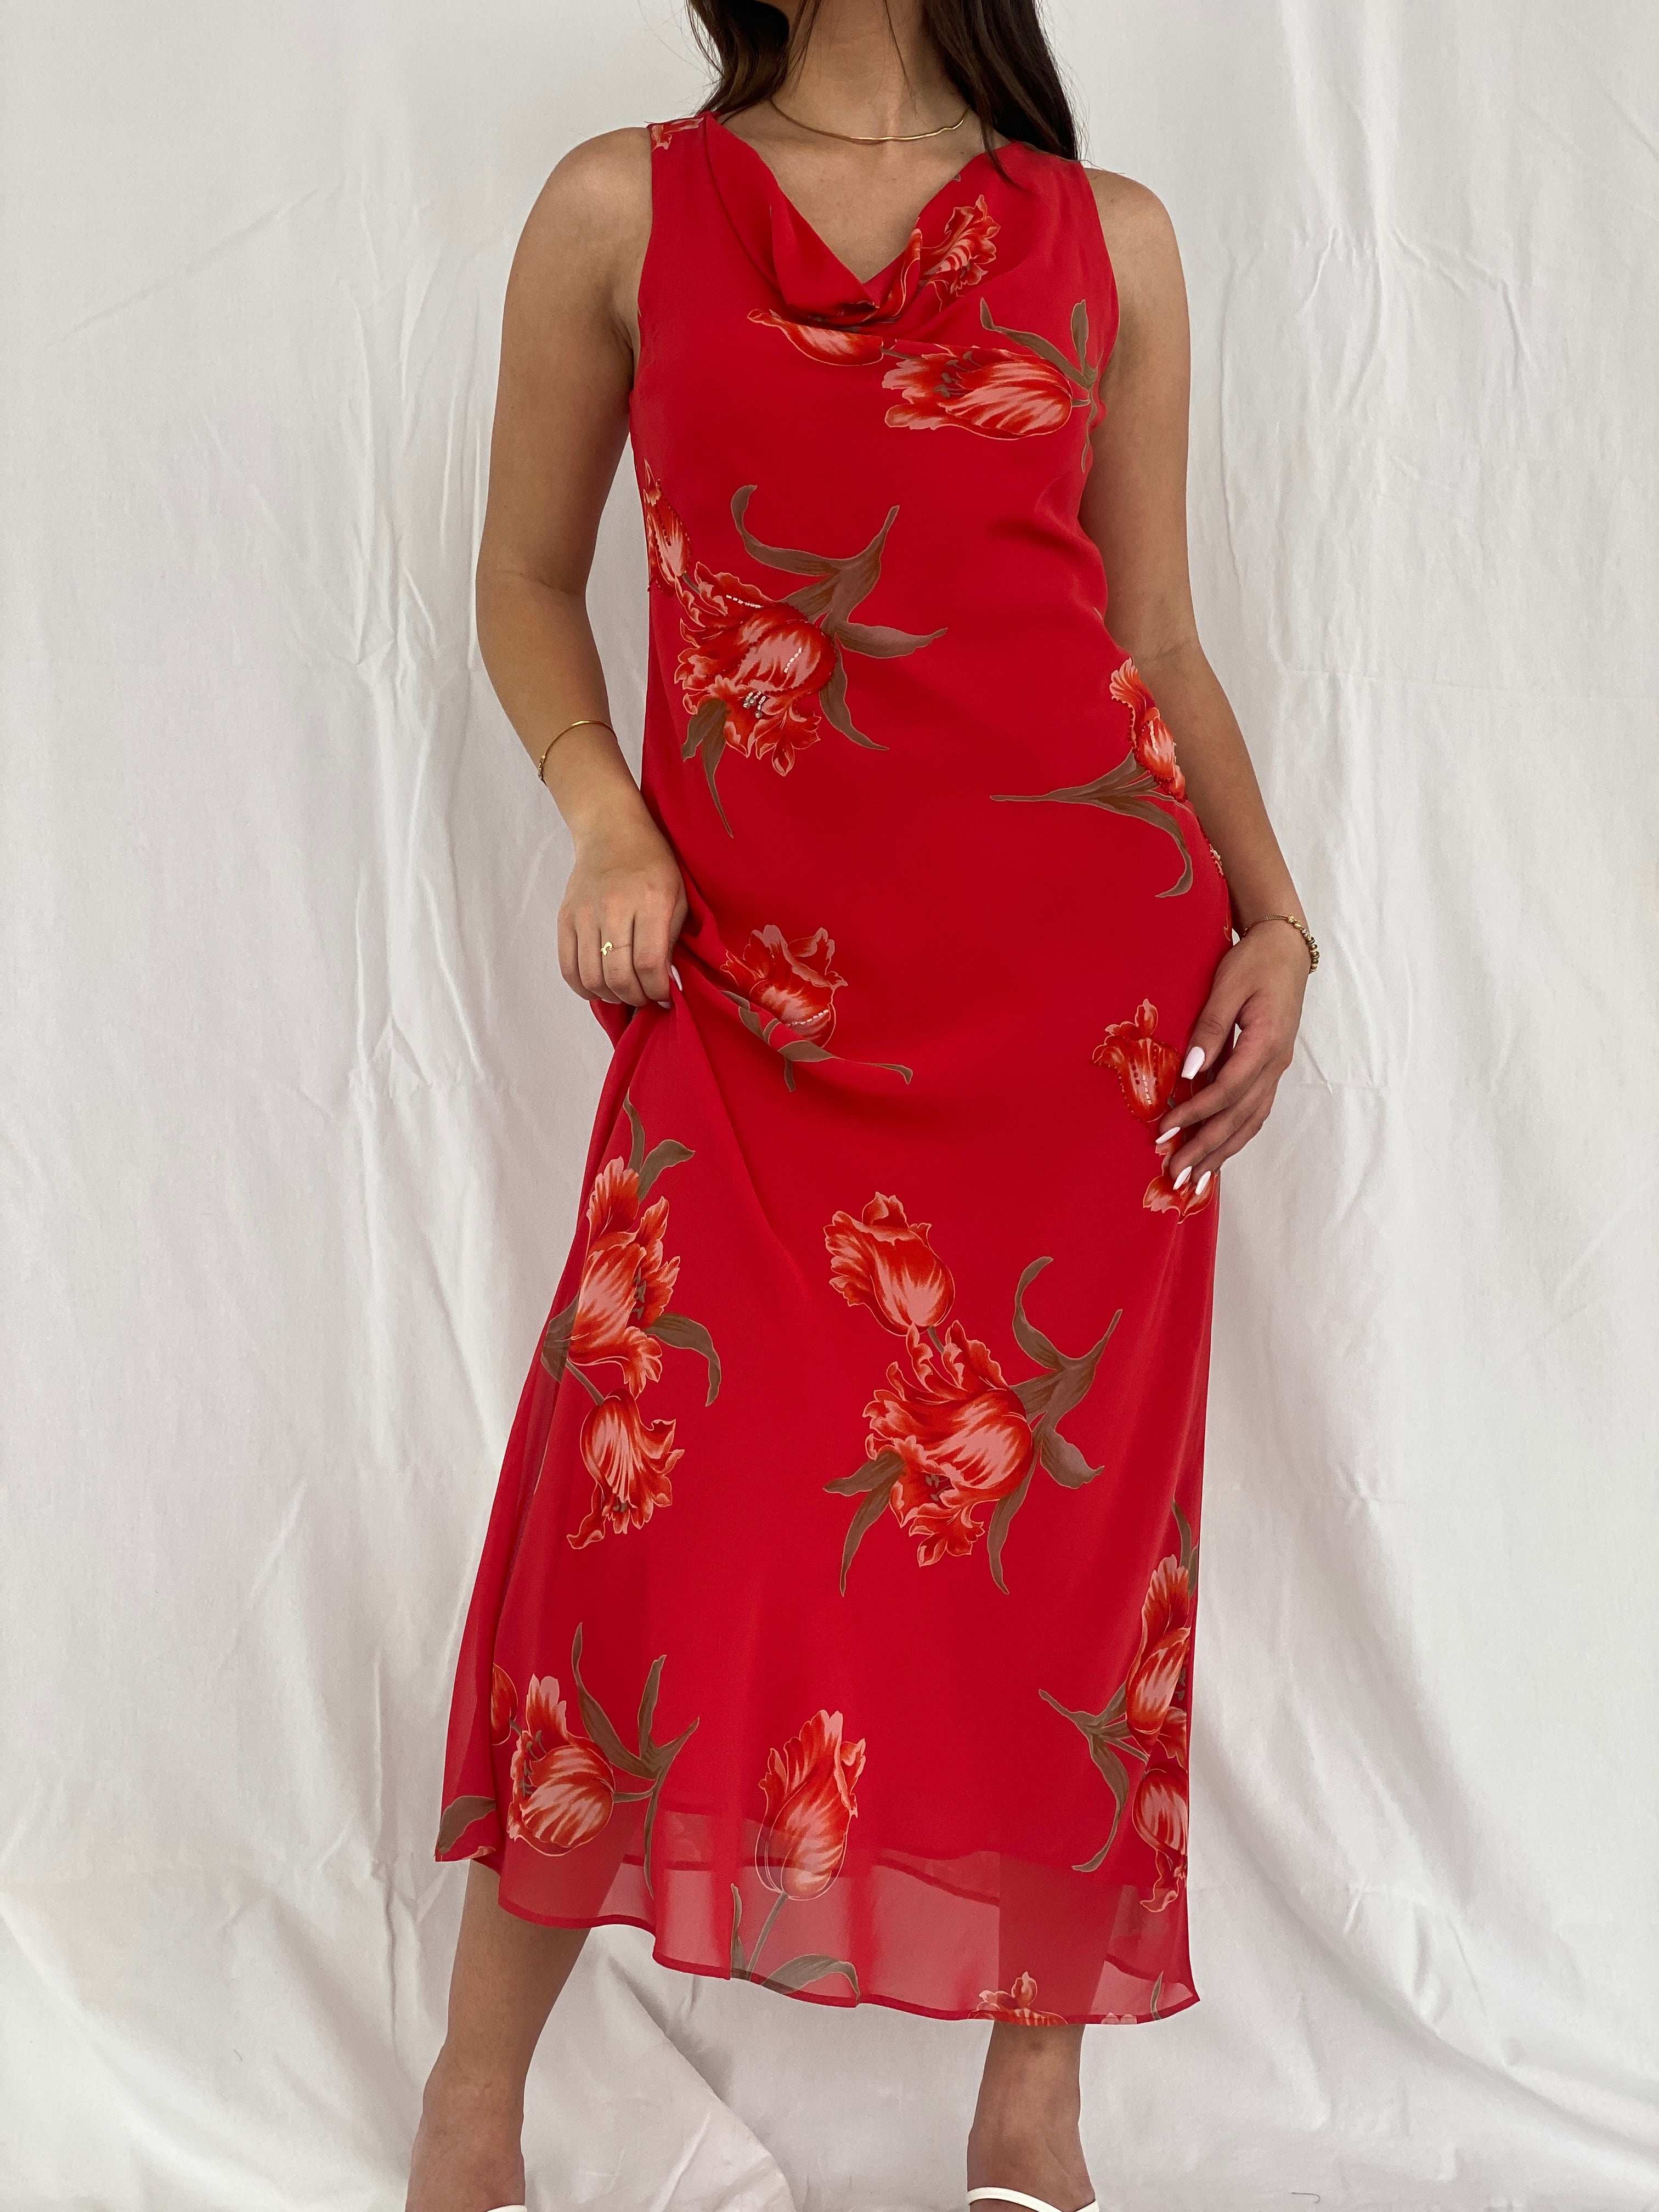 Vintage Jessica Howard Red Floral Maxi Dress Size M - Balagan Vintage Maxi Dress 90s, 90s dress, floral dress, maxi dress, NEW IN, Rama, Wedding Guest